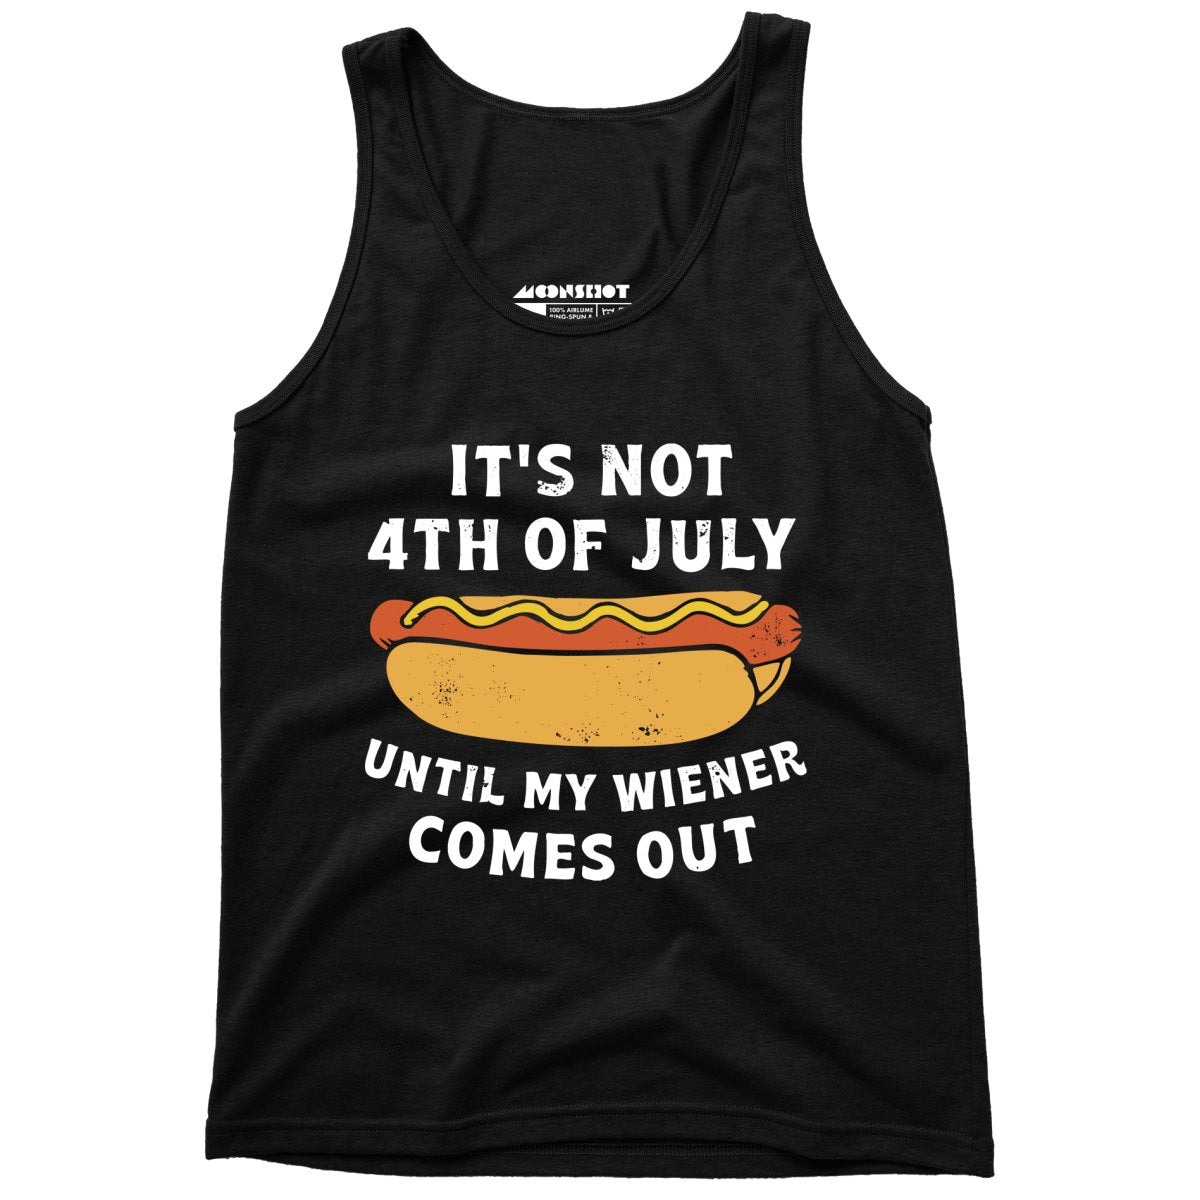 It's Not 4th of July Until My Wiener Comes Out - Unisex Tank Top